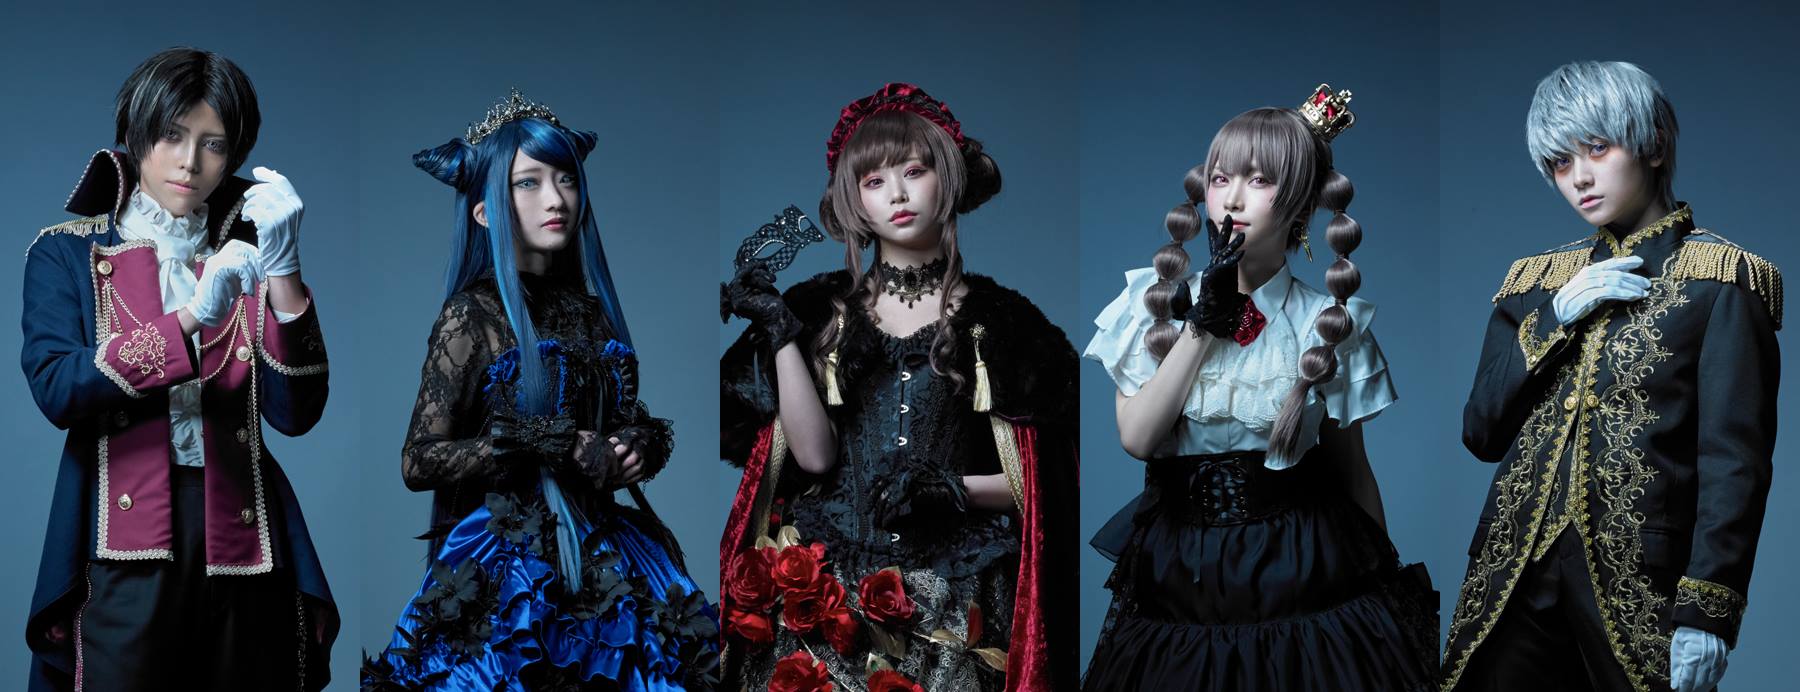 Cosmetic Brand “KATE” Provides Cosplay Makeup Book in Comiket 95